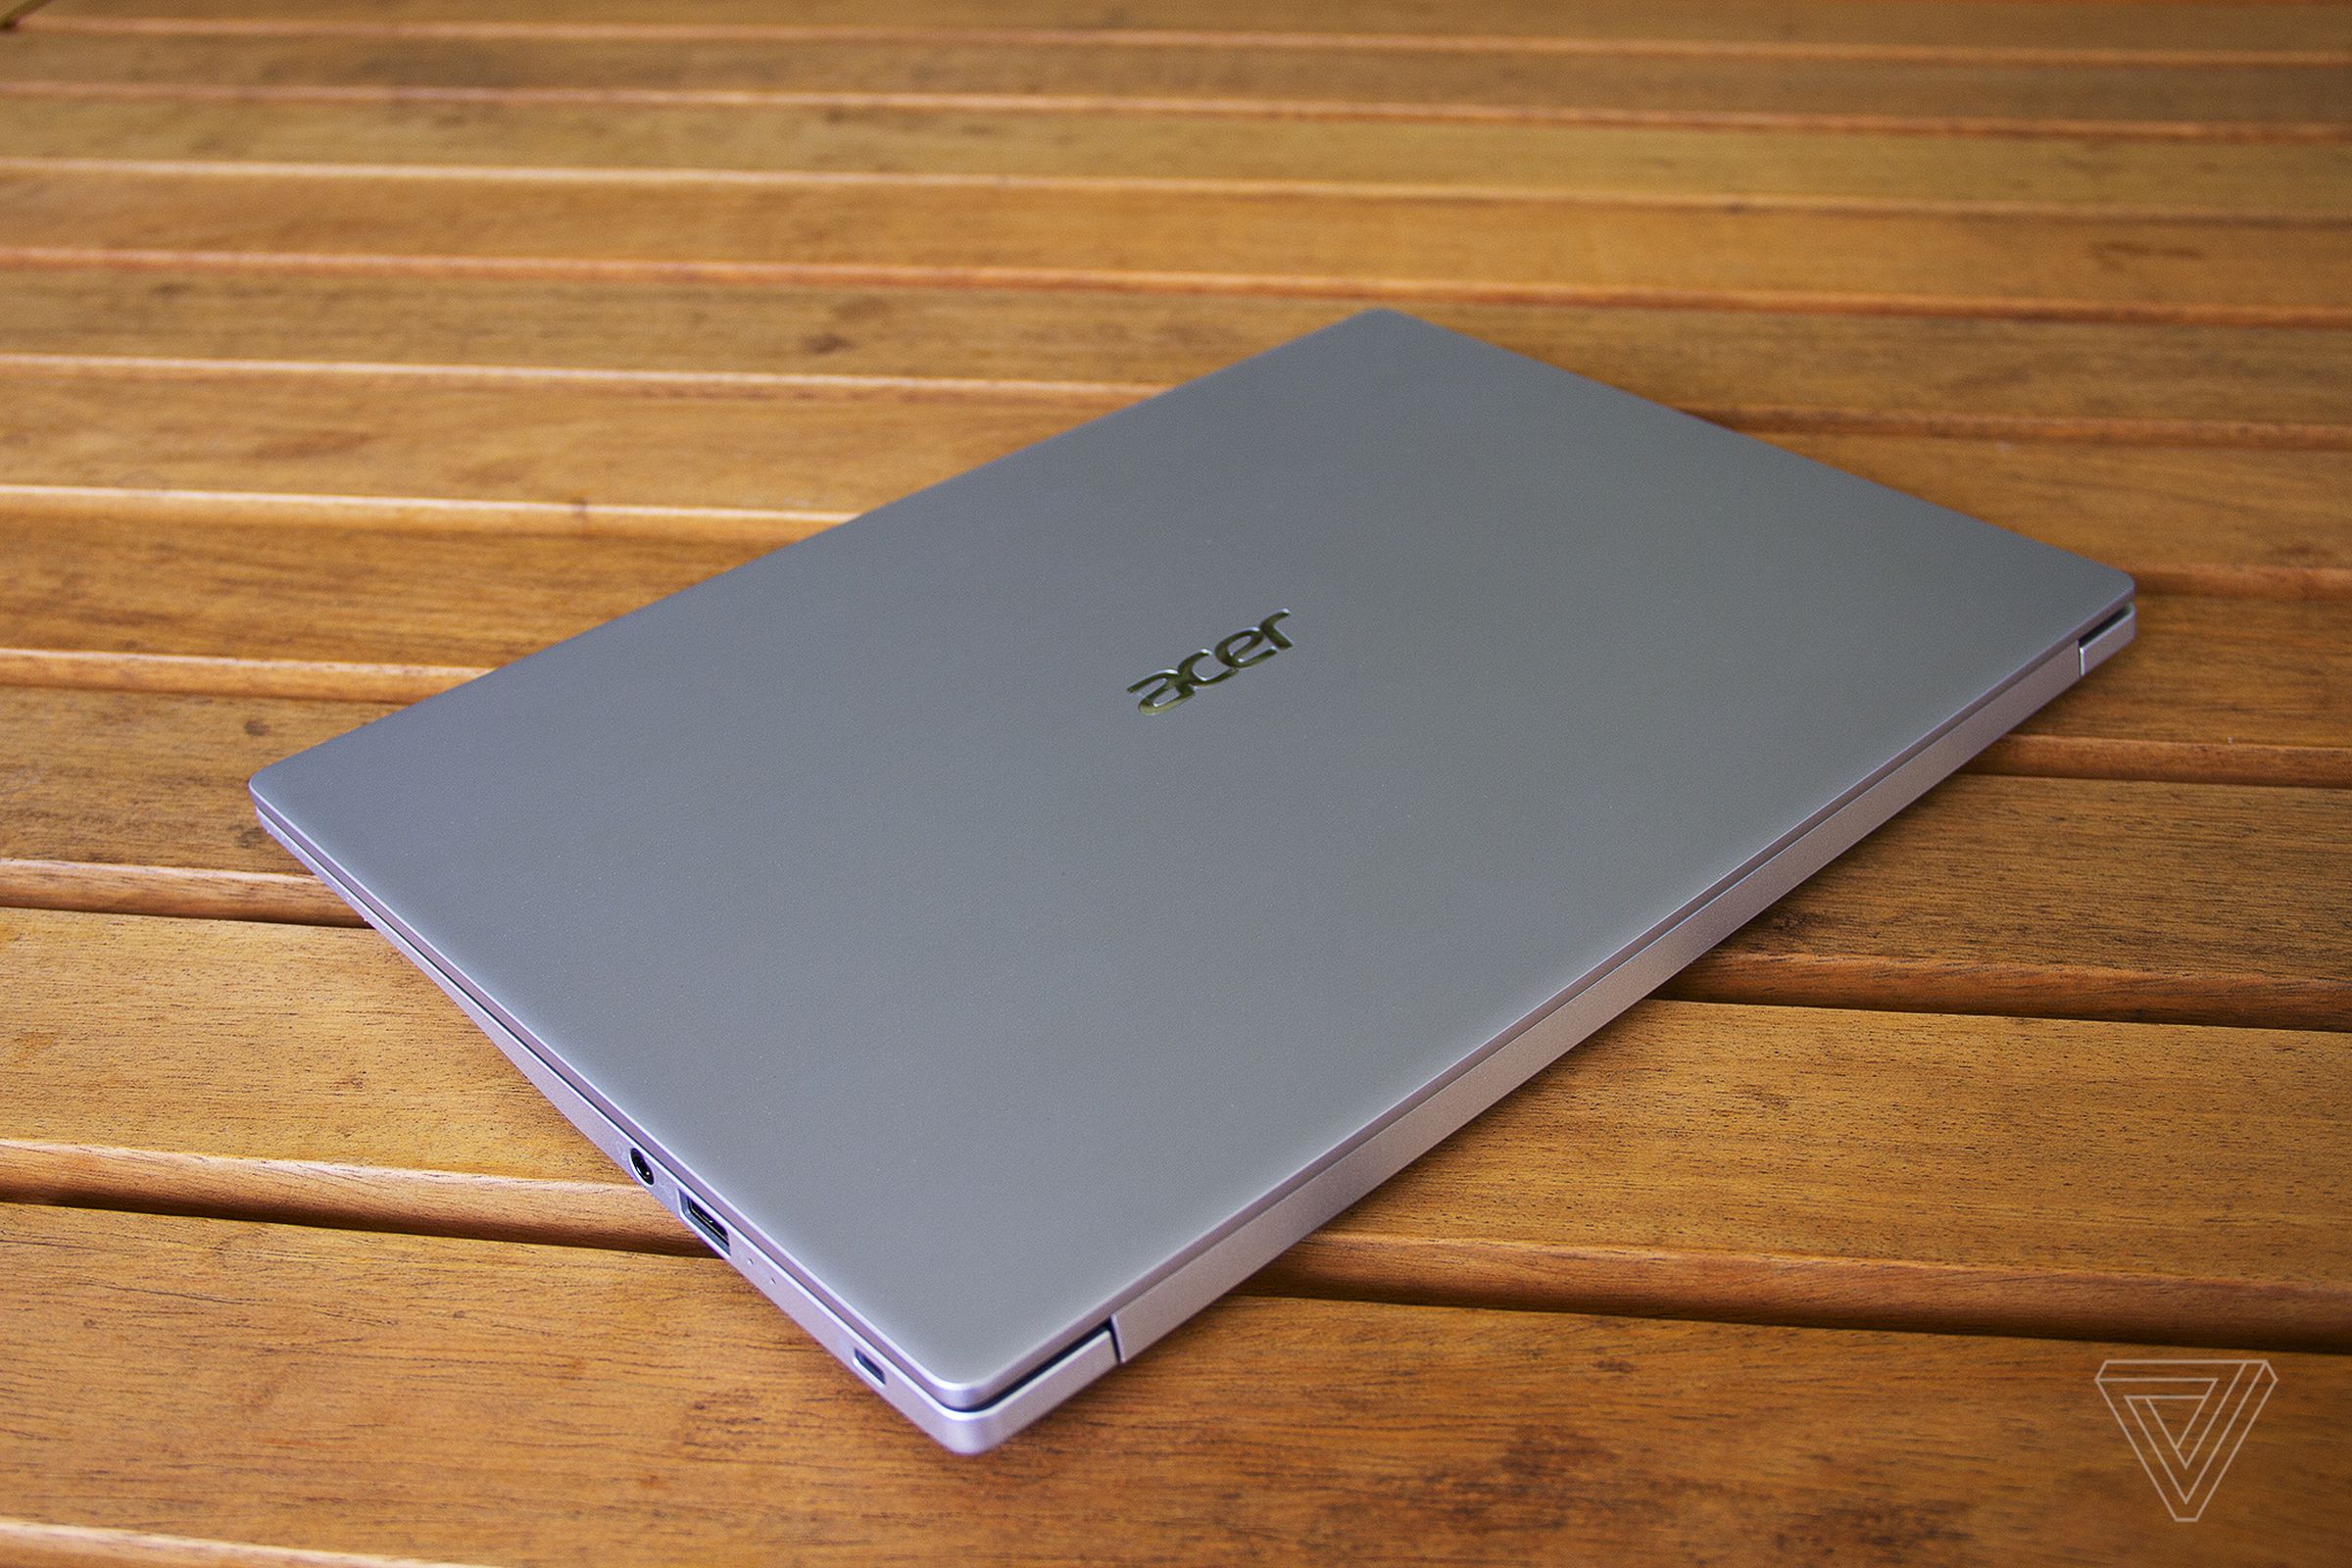 The lid of the Acer Swift 3, closed.